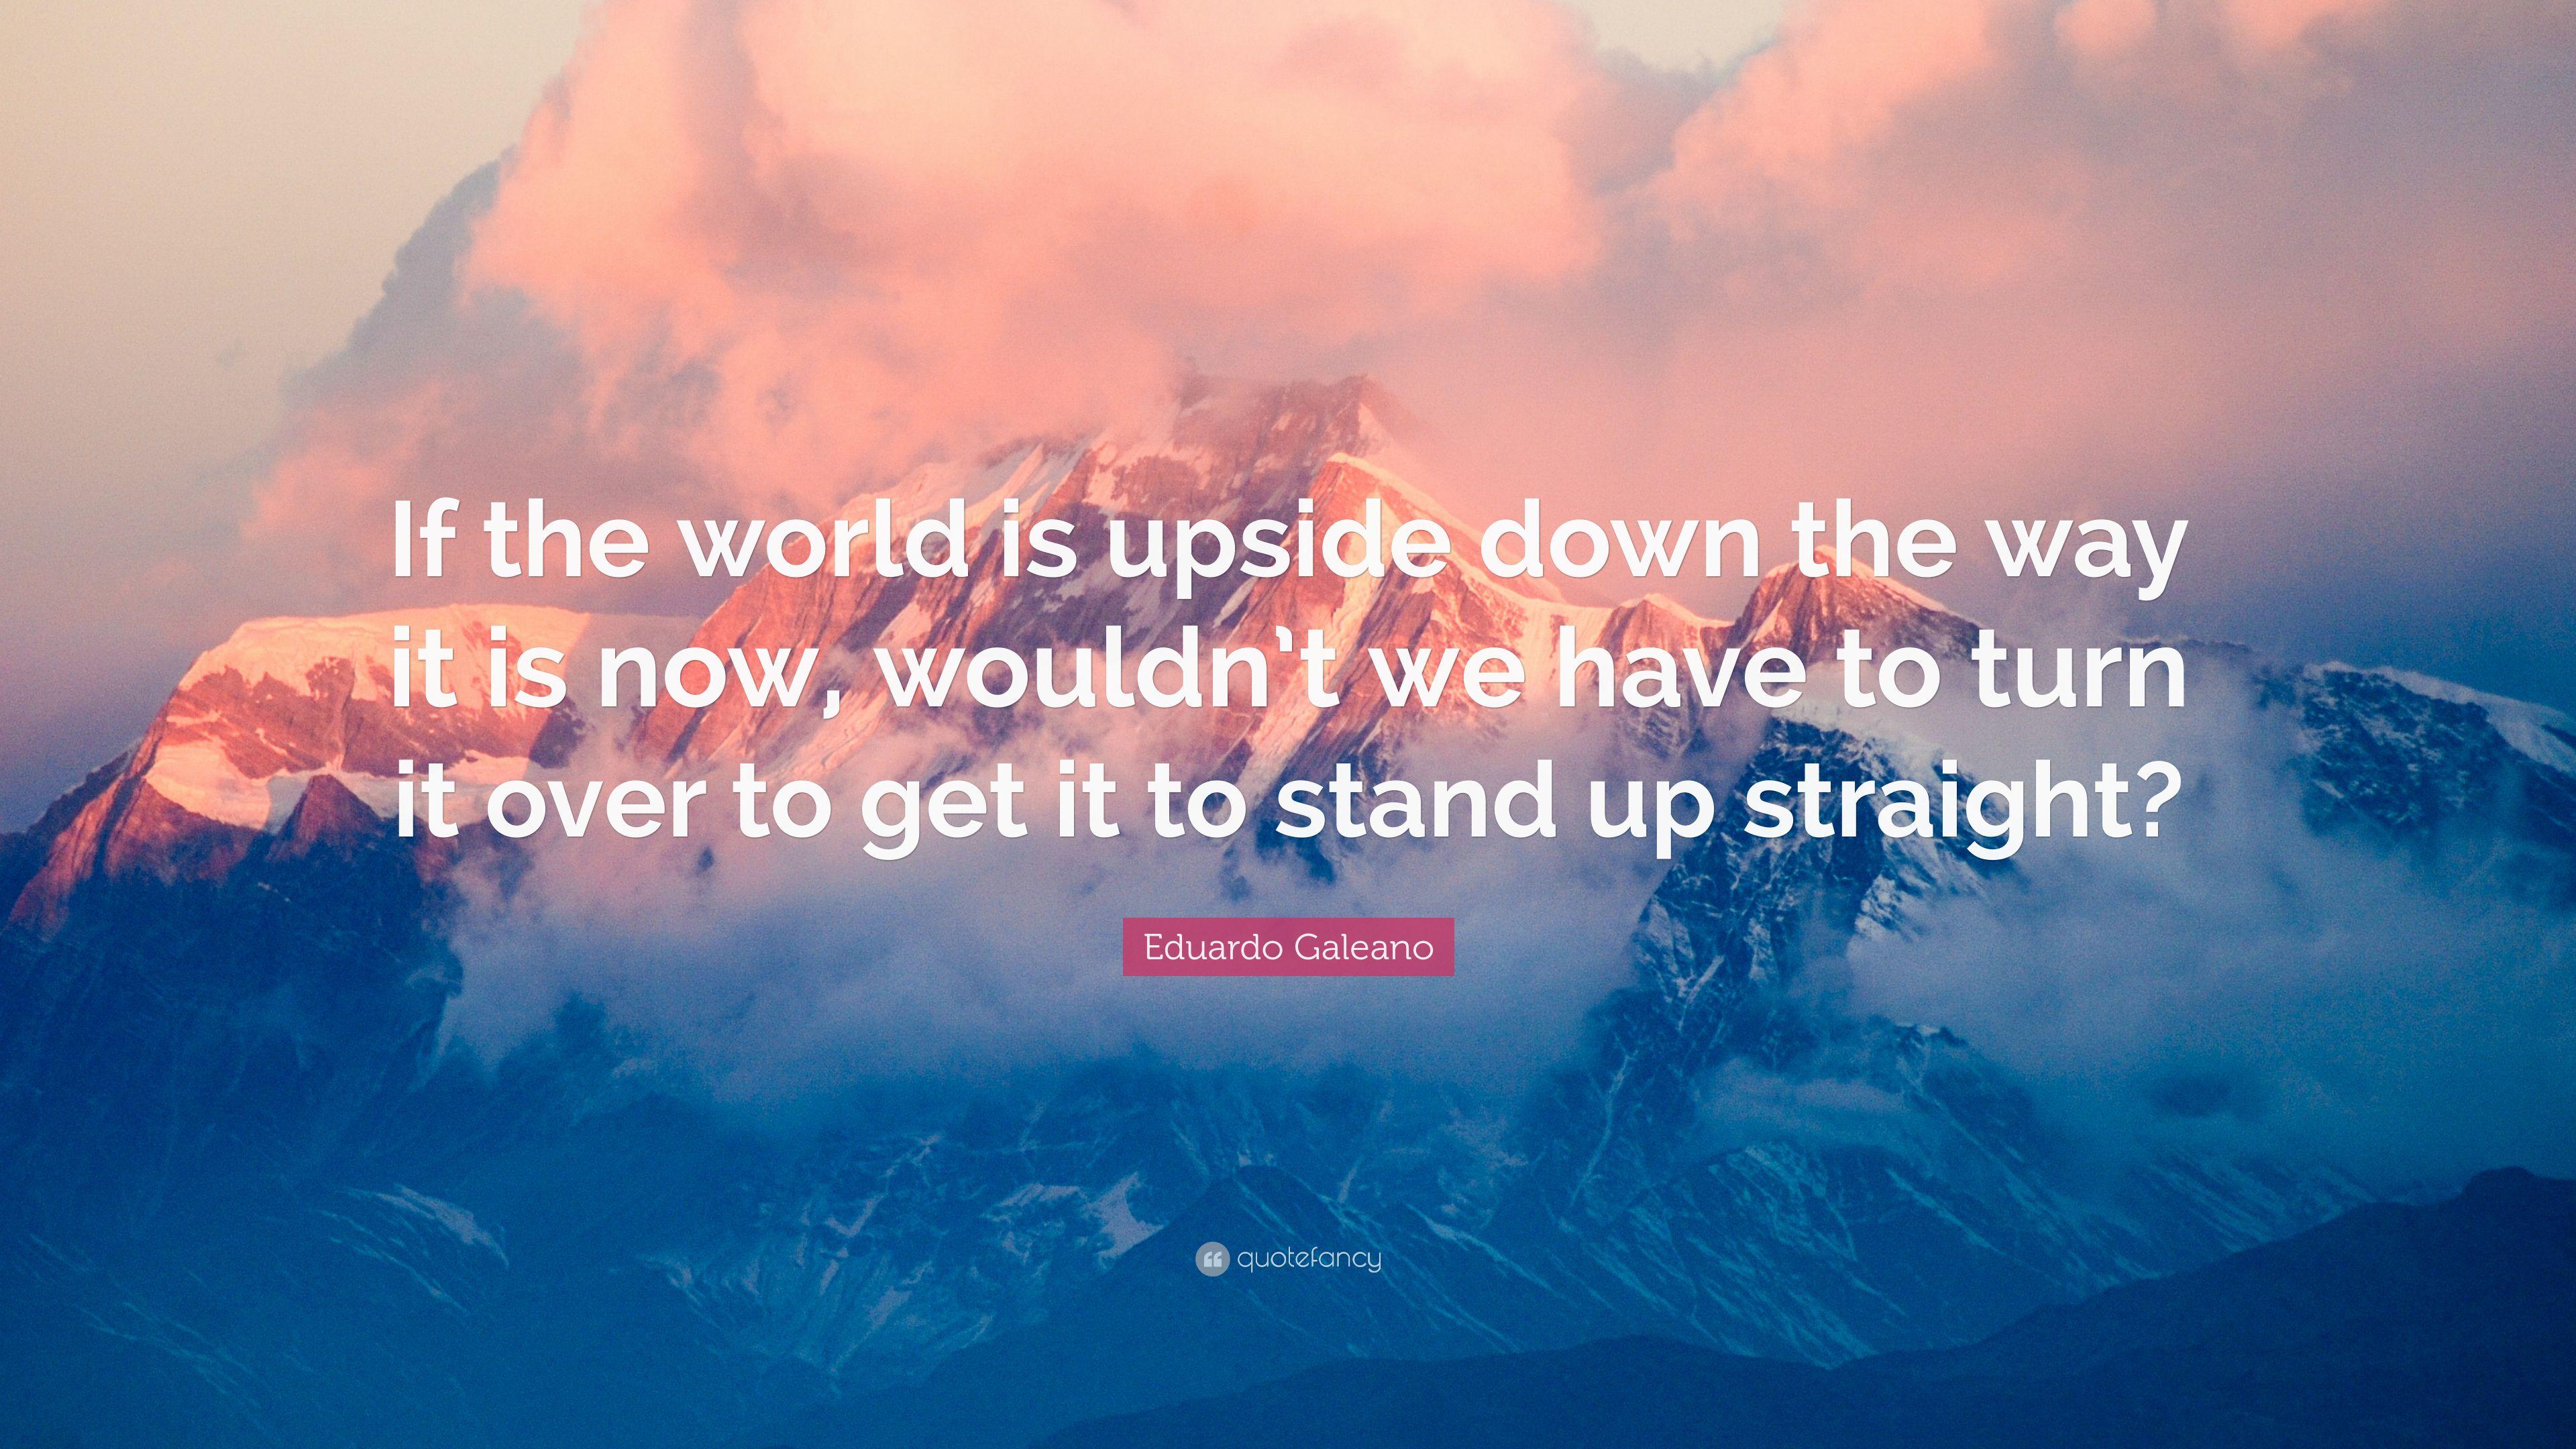 Eduardo Galeano Quote: “If the world is upside down the way it is